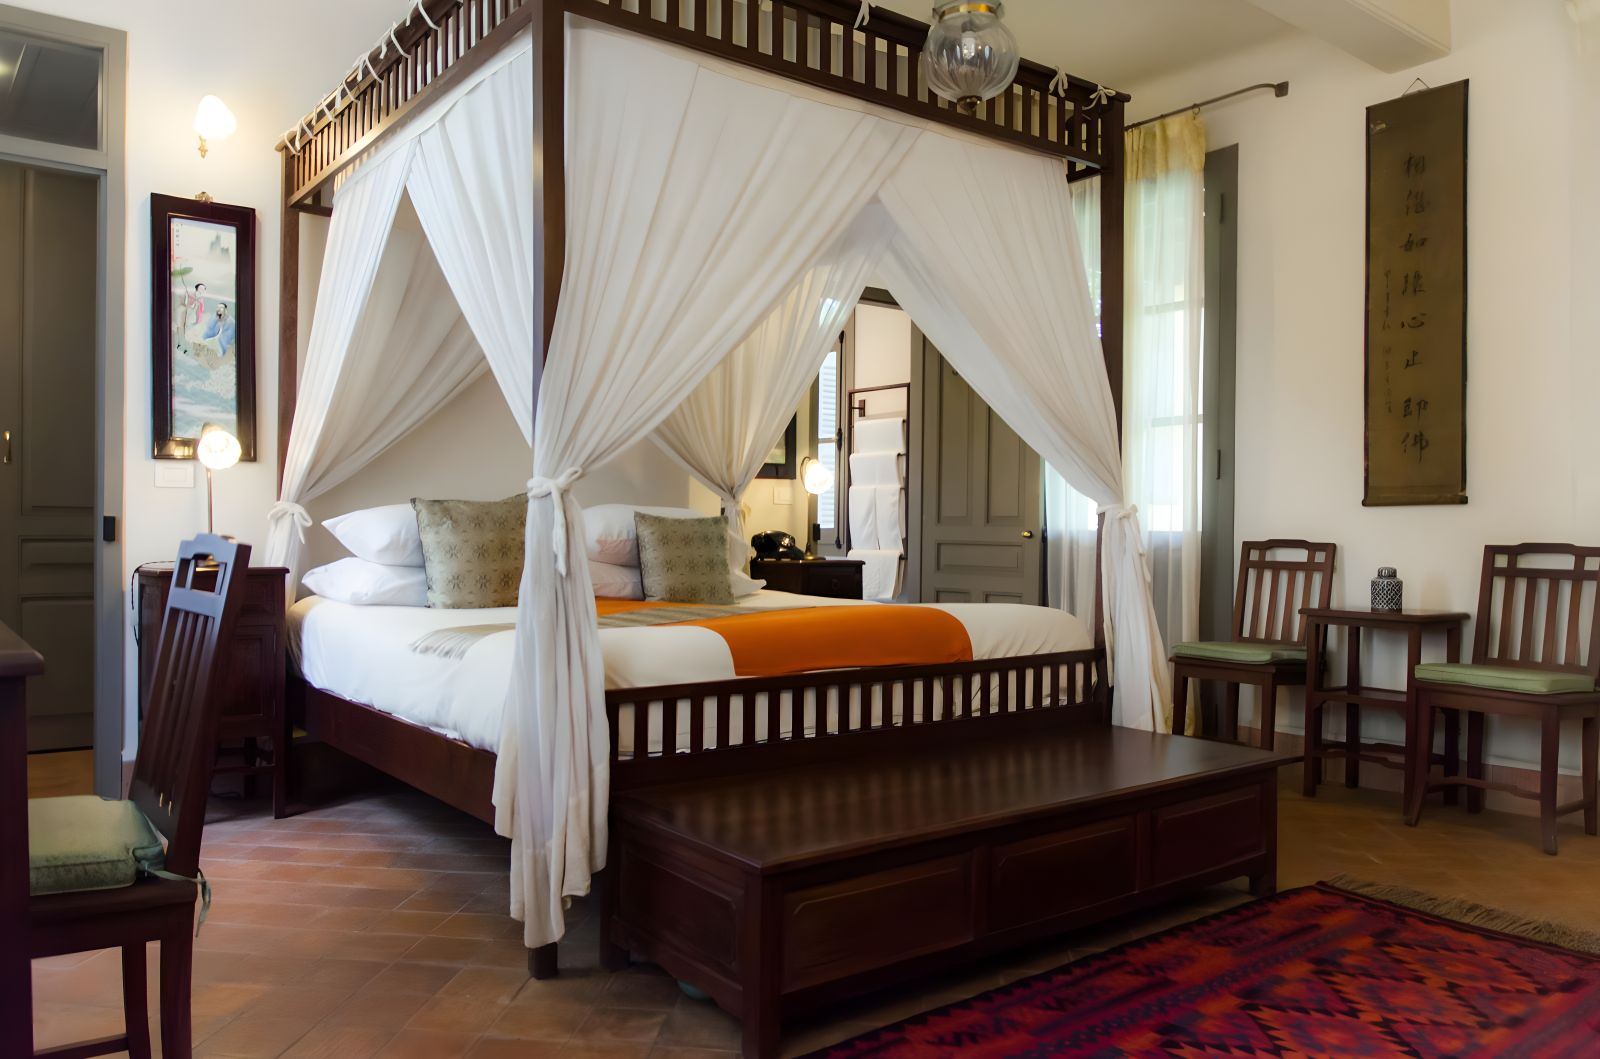 Deluxe guest room at Satri House in Luang Prabang, Laos